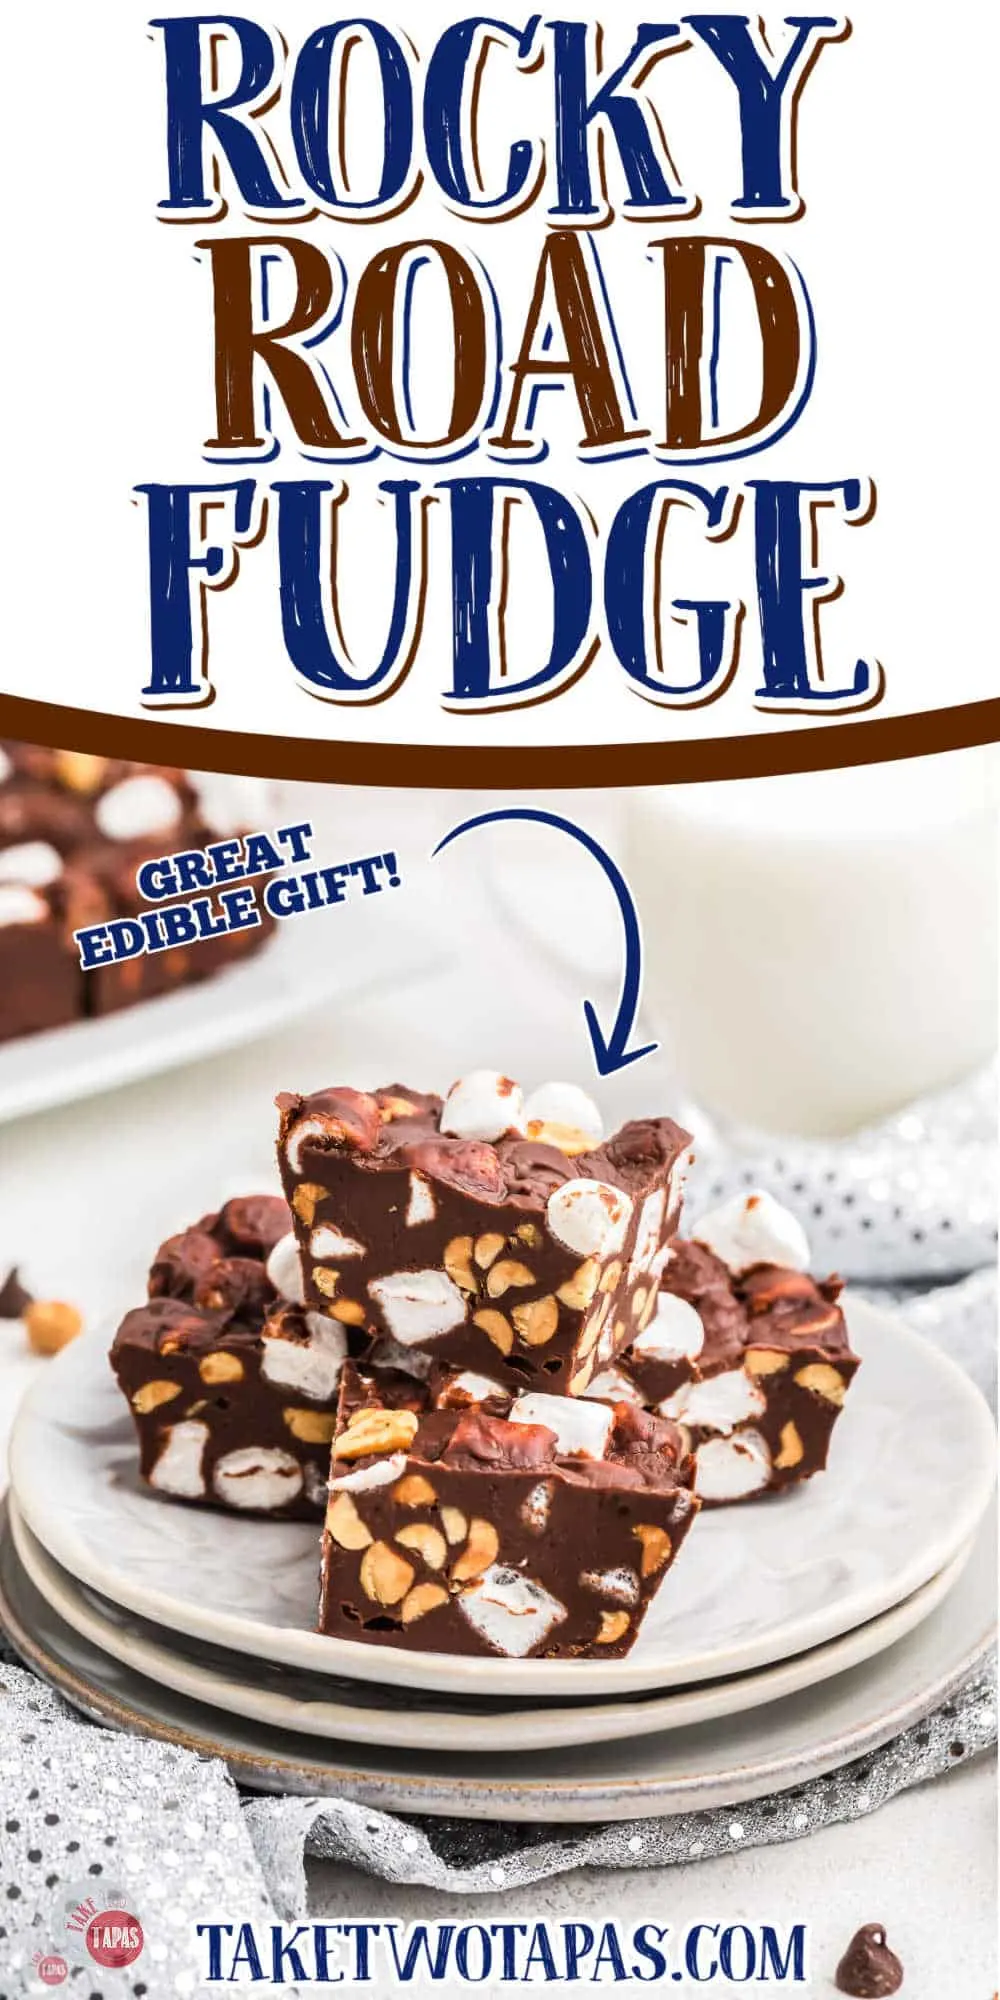 stack of fudge with text "rocky road fudge"